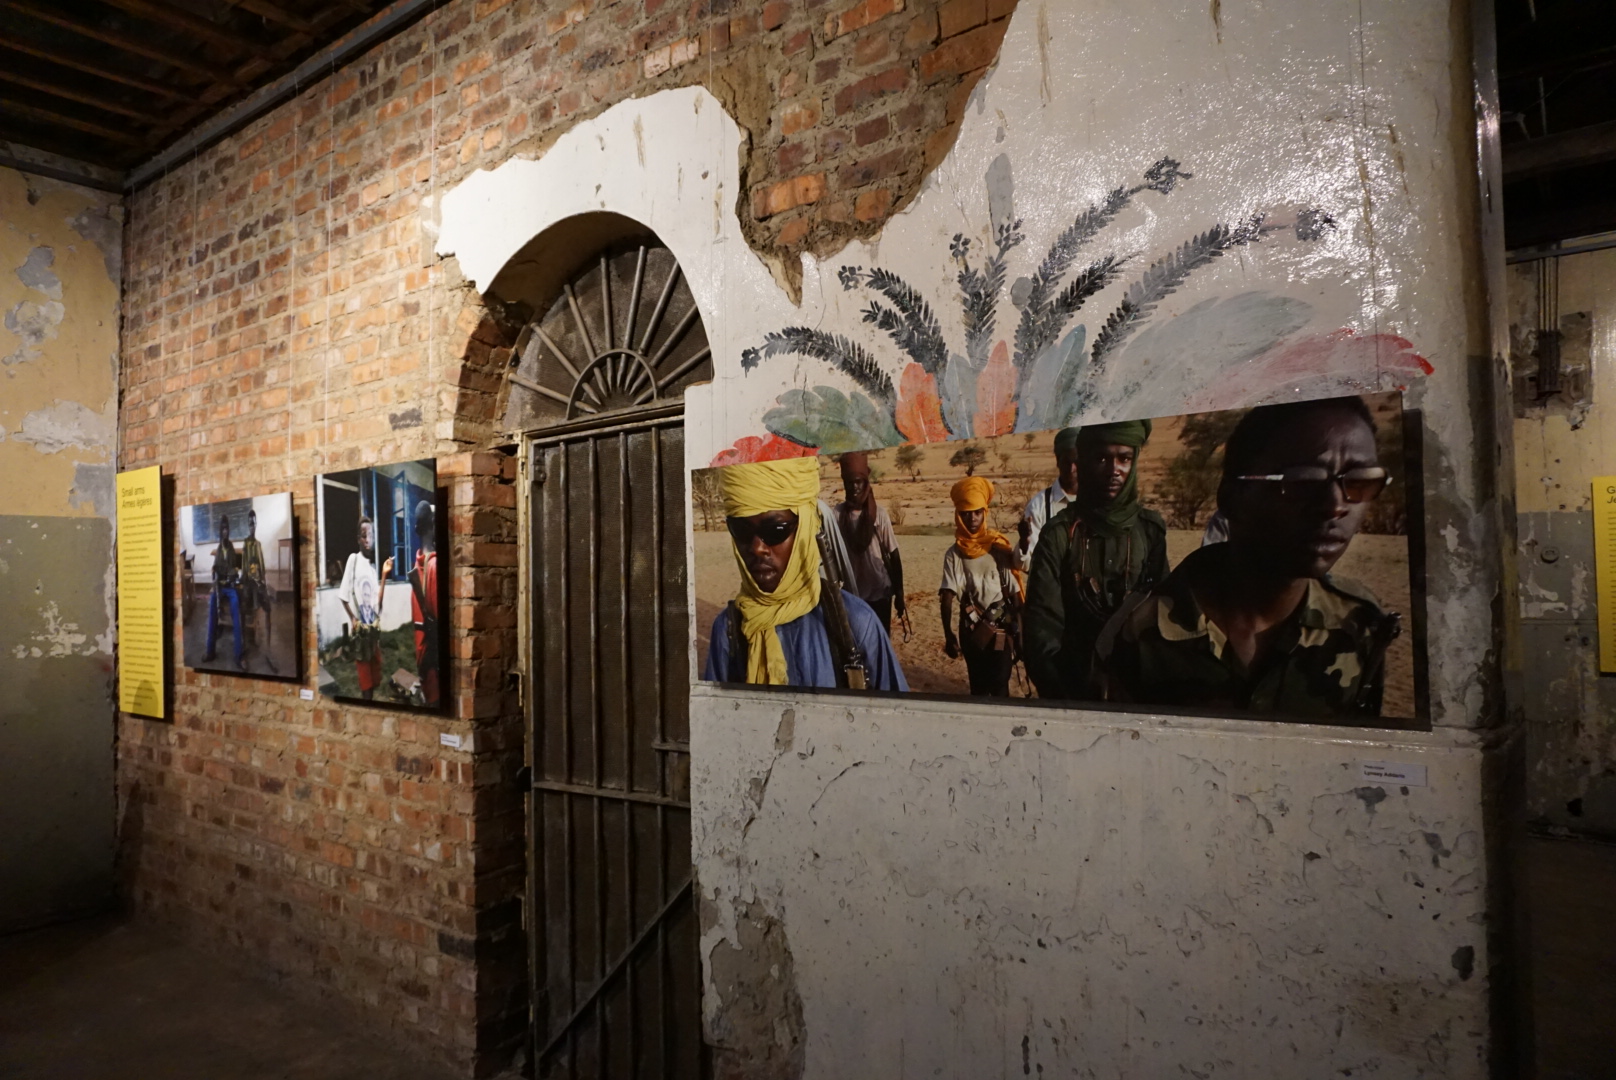 Child Soldiers Exhibition, Constitution Hill